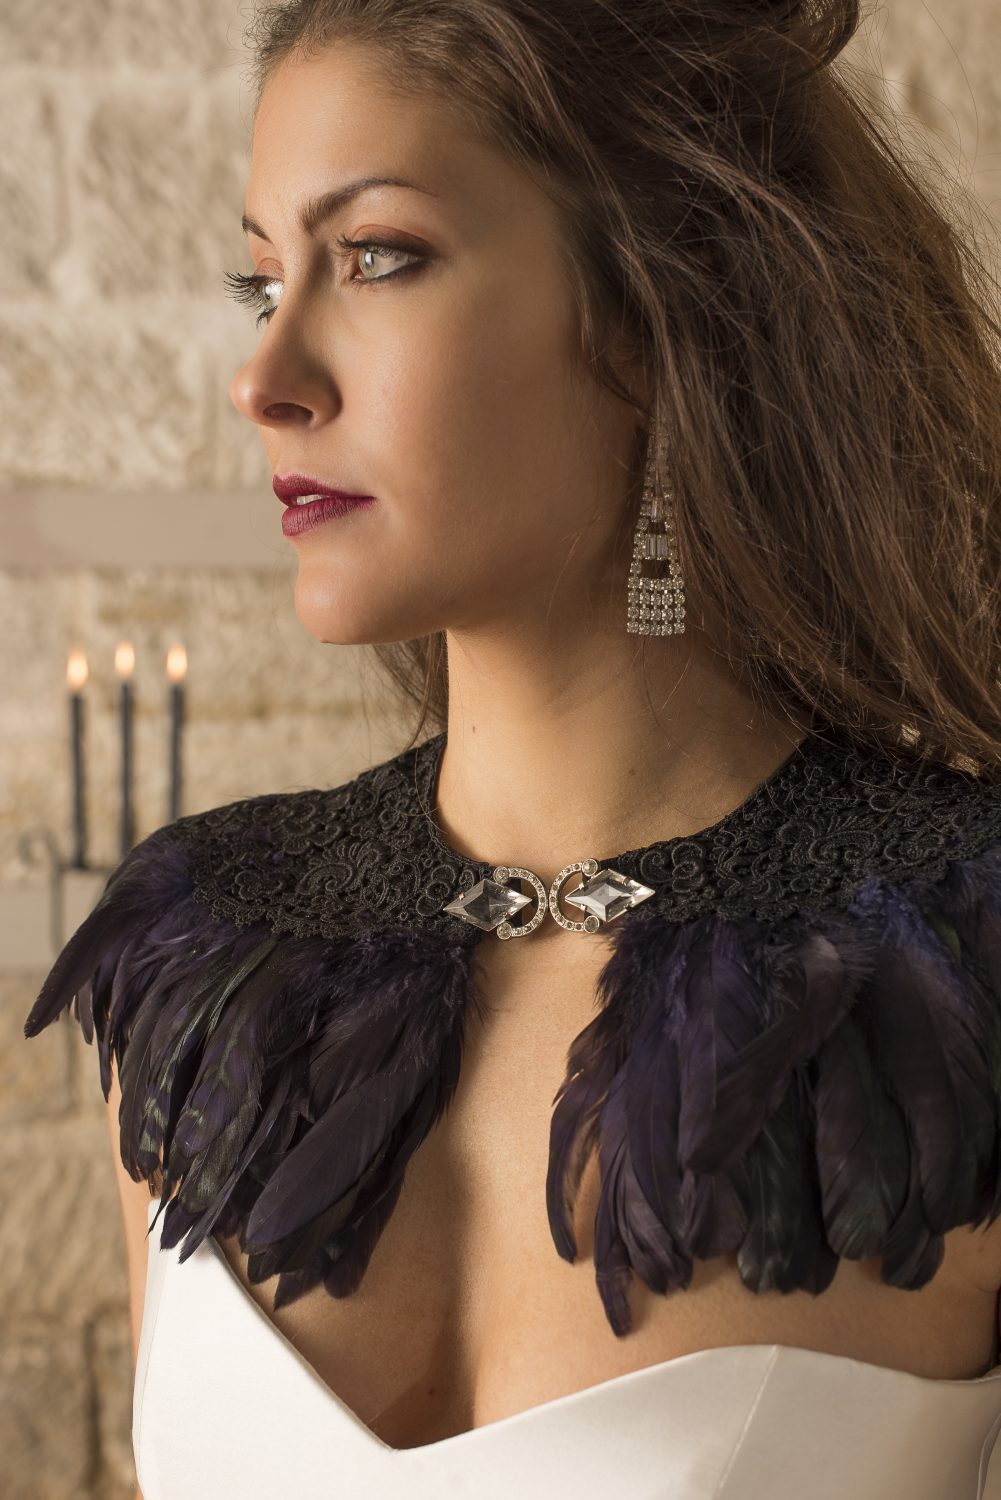 Vintage chandelier earrings, £22, Victorian lace feather capelet, £180, Crystal Heirlooms crystal-heirlooms.co.uk 07717 467049; Stephanie Allin Lucerne dress, £2175, The Bridal Boutique of Jules boutiqueofjules.co.uk 01304 389710